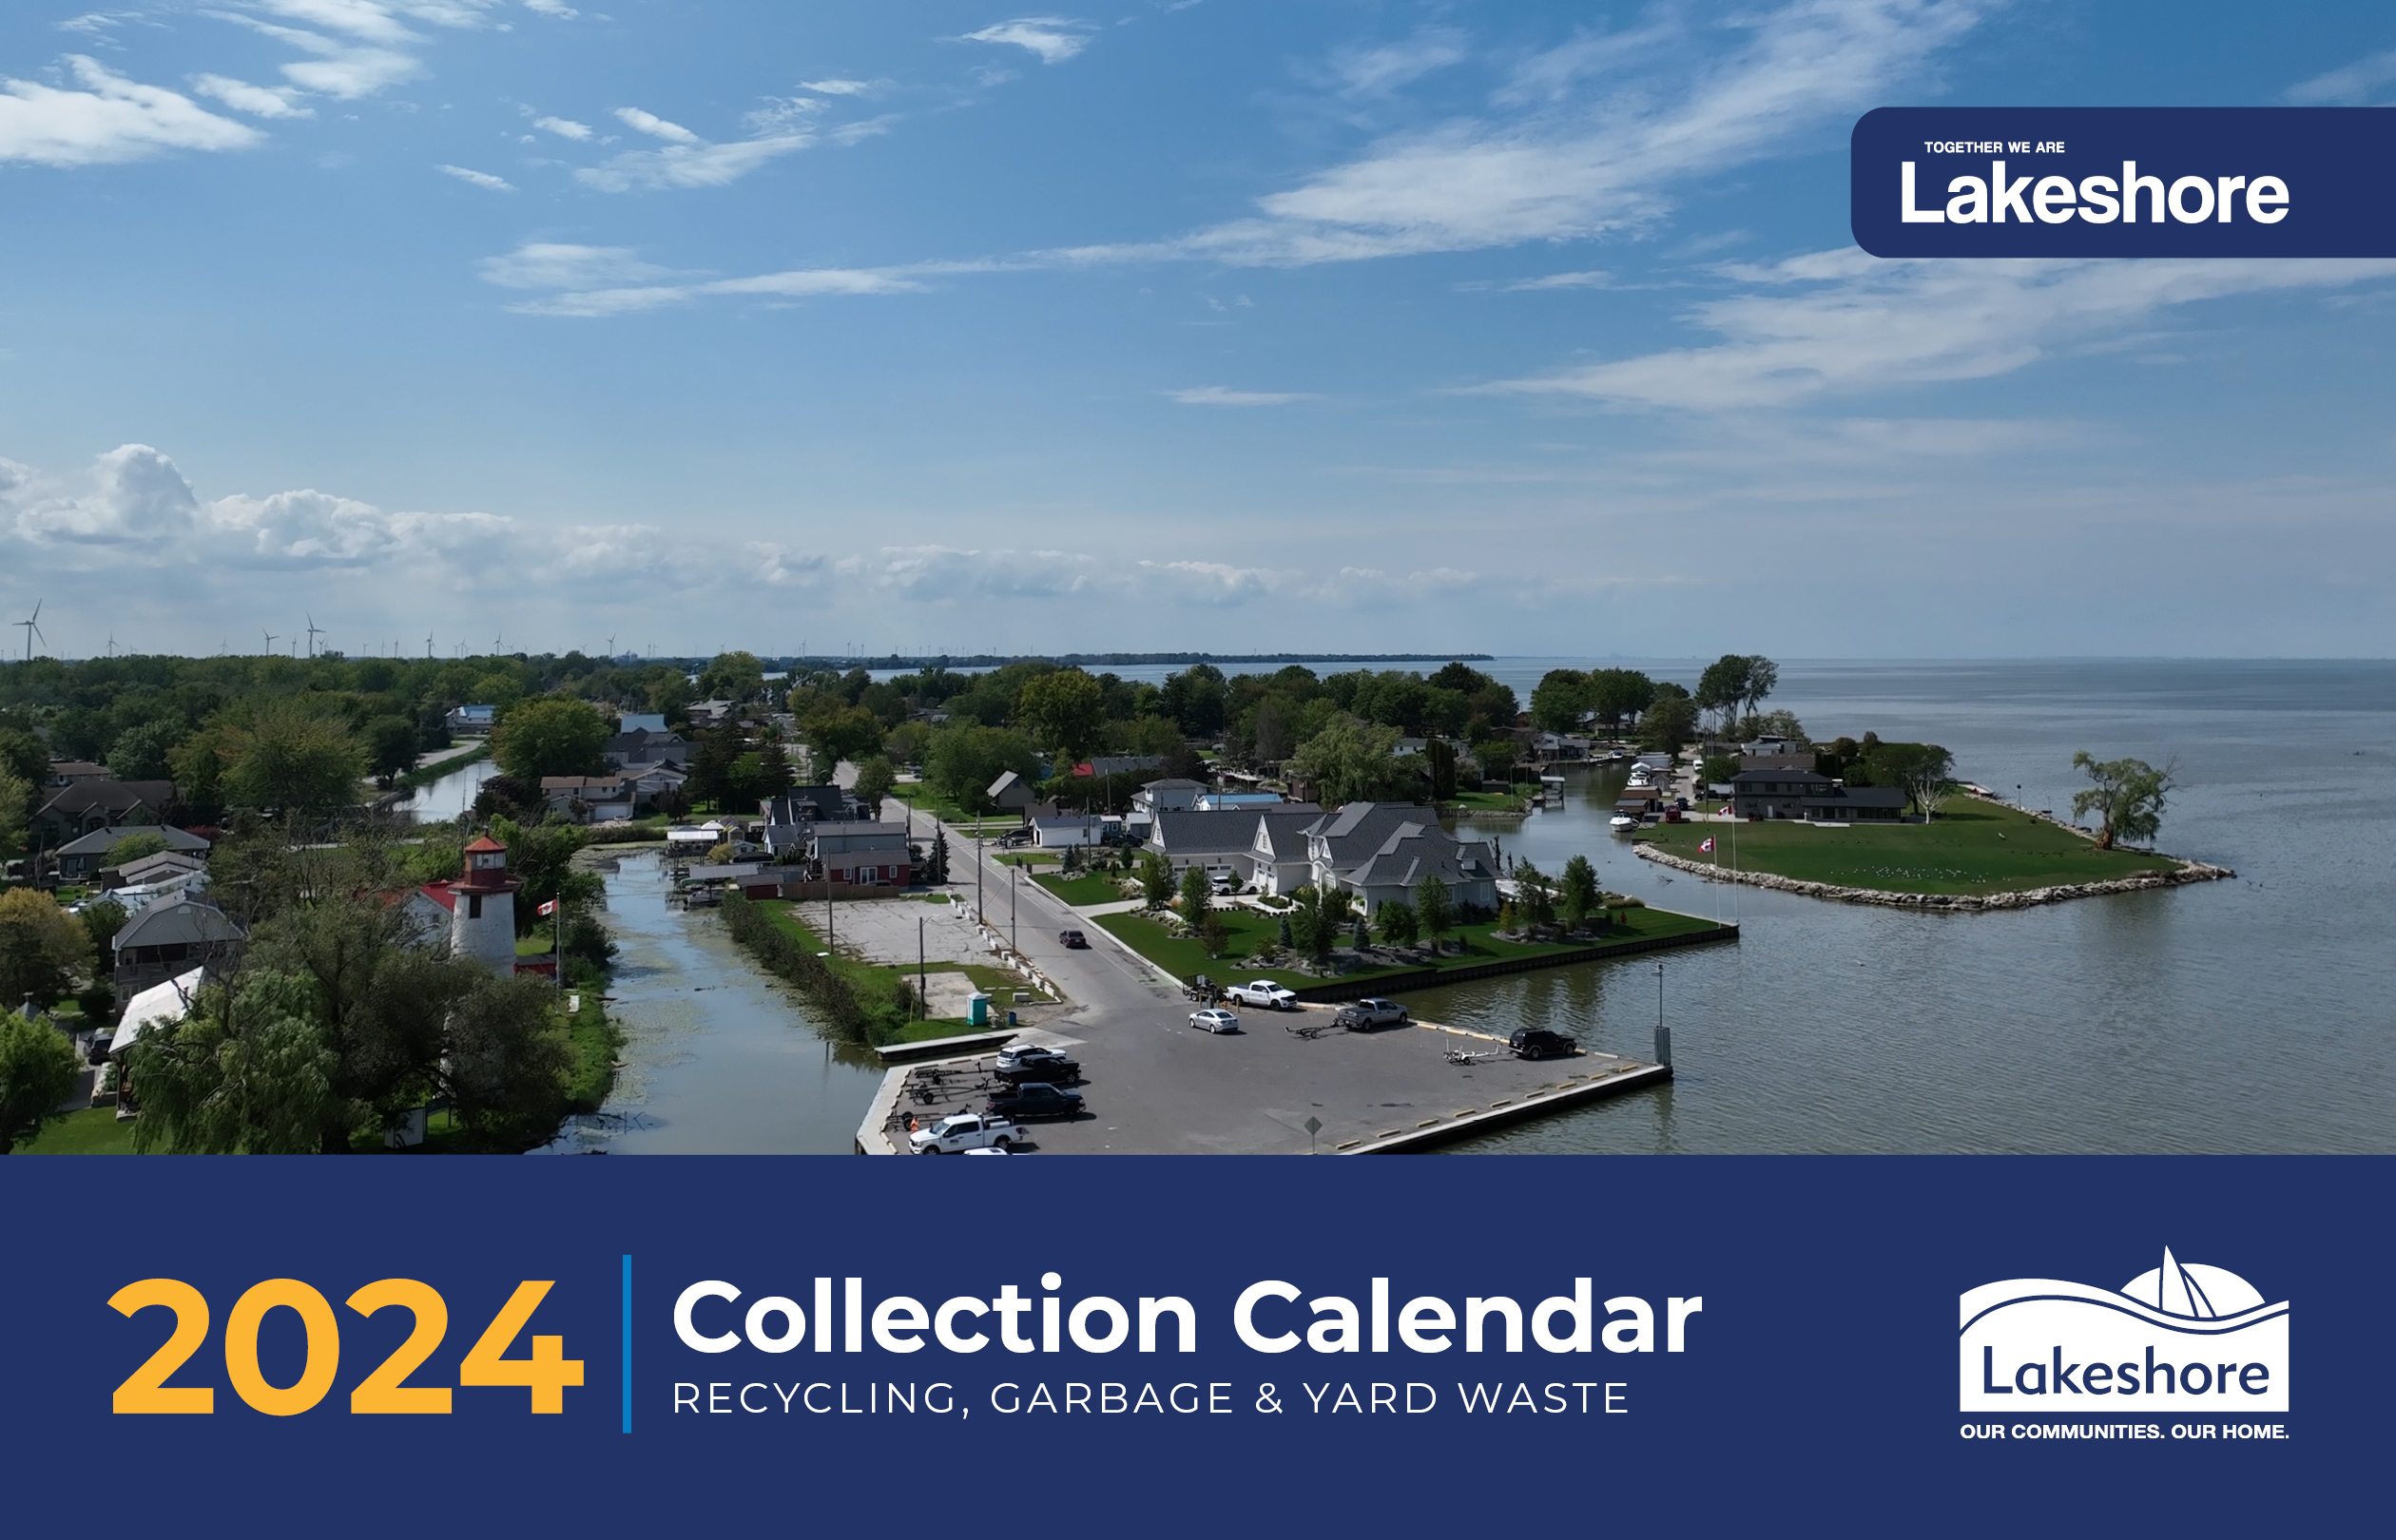 Lakeshore's 2024 Collection Calendar cover page featuring an aerial image of Lighthouse Cove.